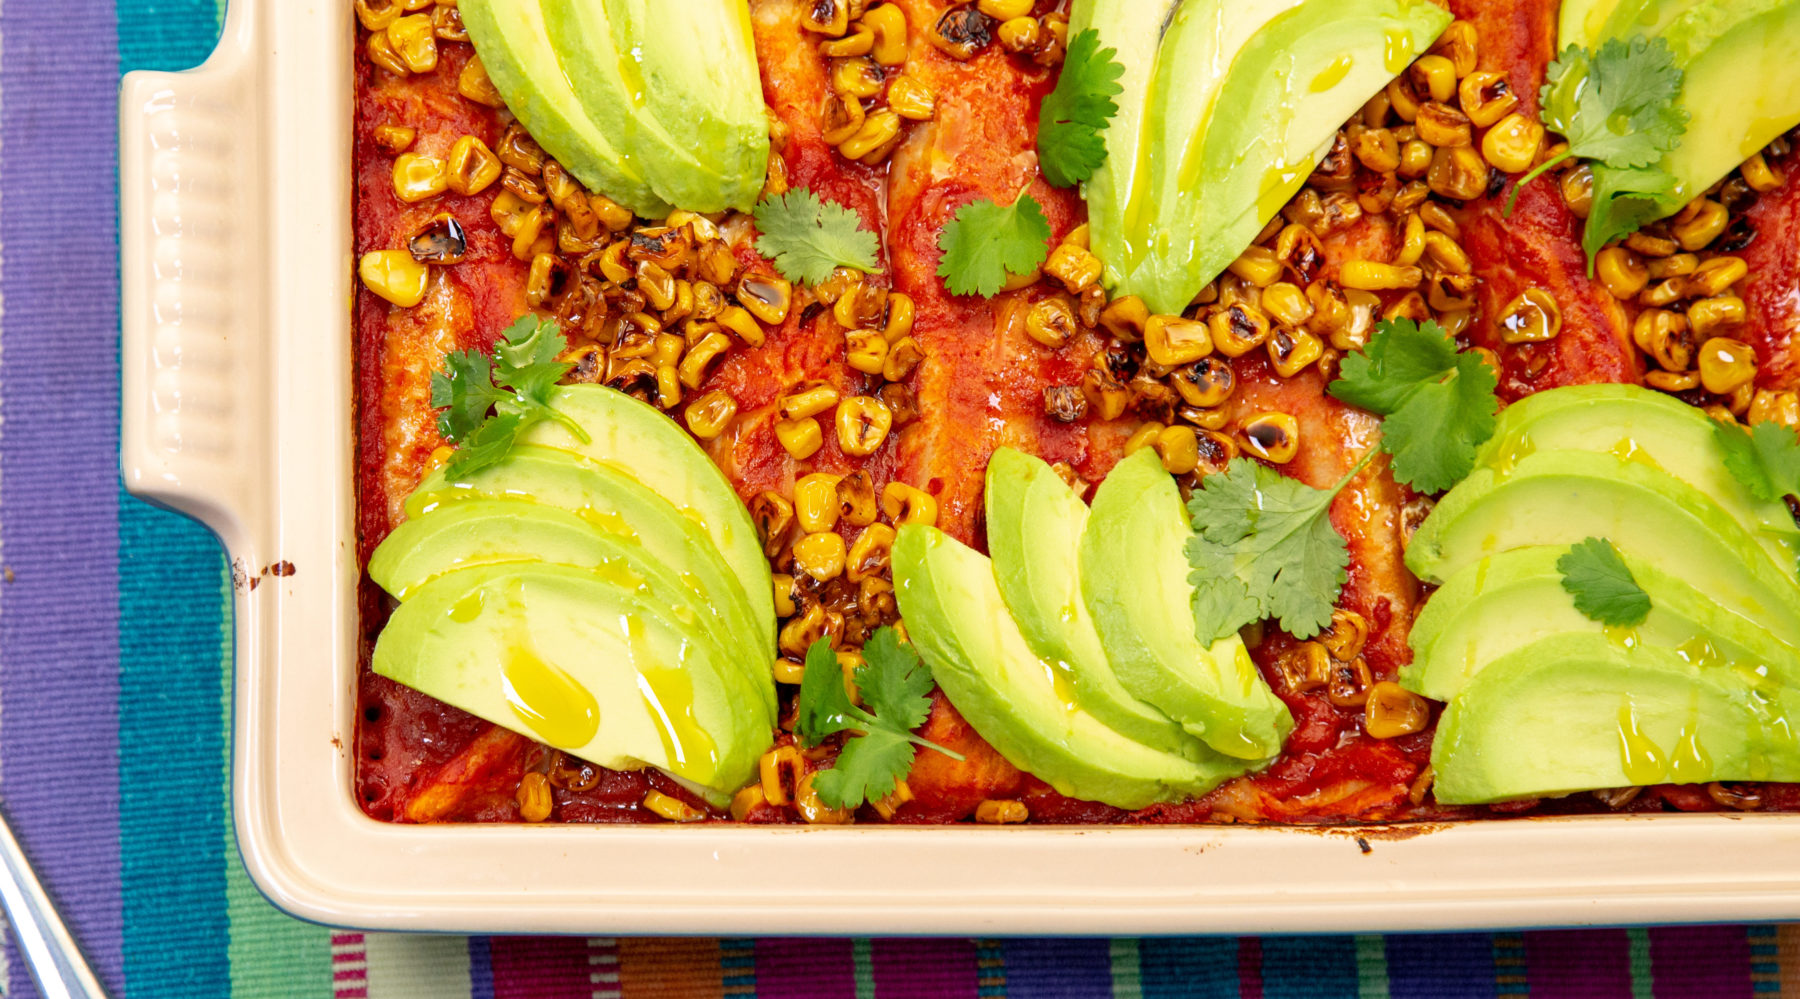 A rectangle oven dish full of red food topped with avocado slices.